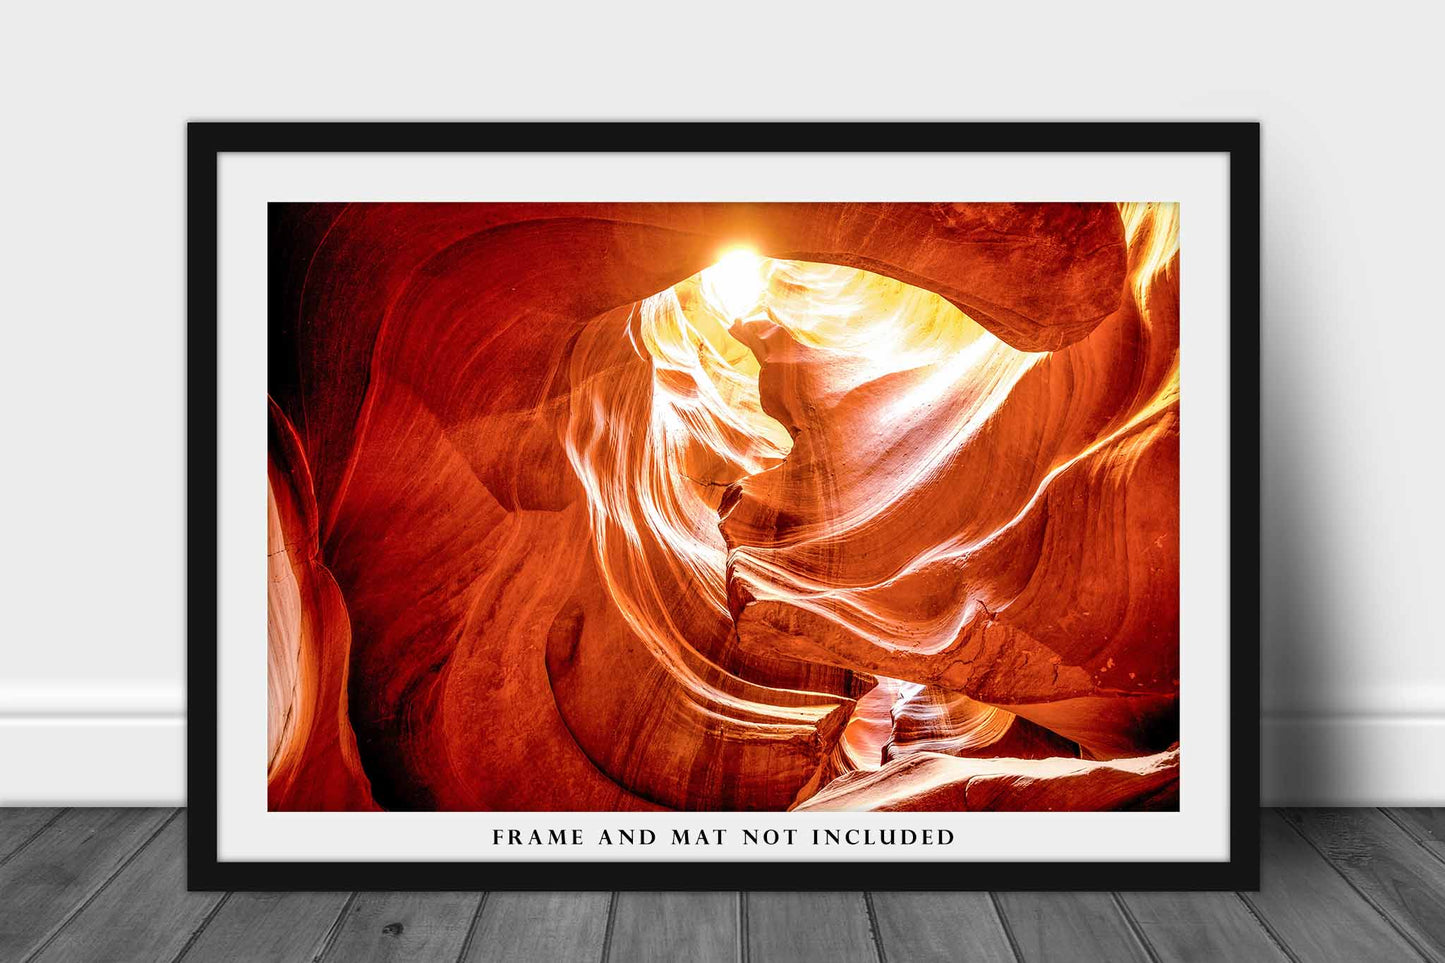 Southwest Photography Print - Wall Art Picture of Light Through Tunnel in Antelope Canyon in Arizona Abstract Slot Canyon Decor